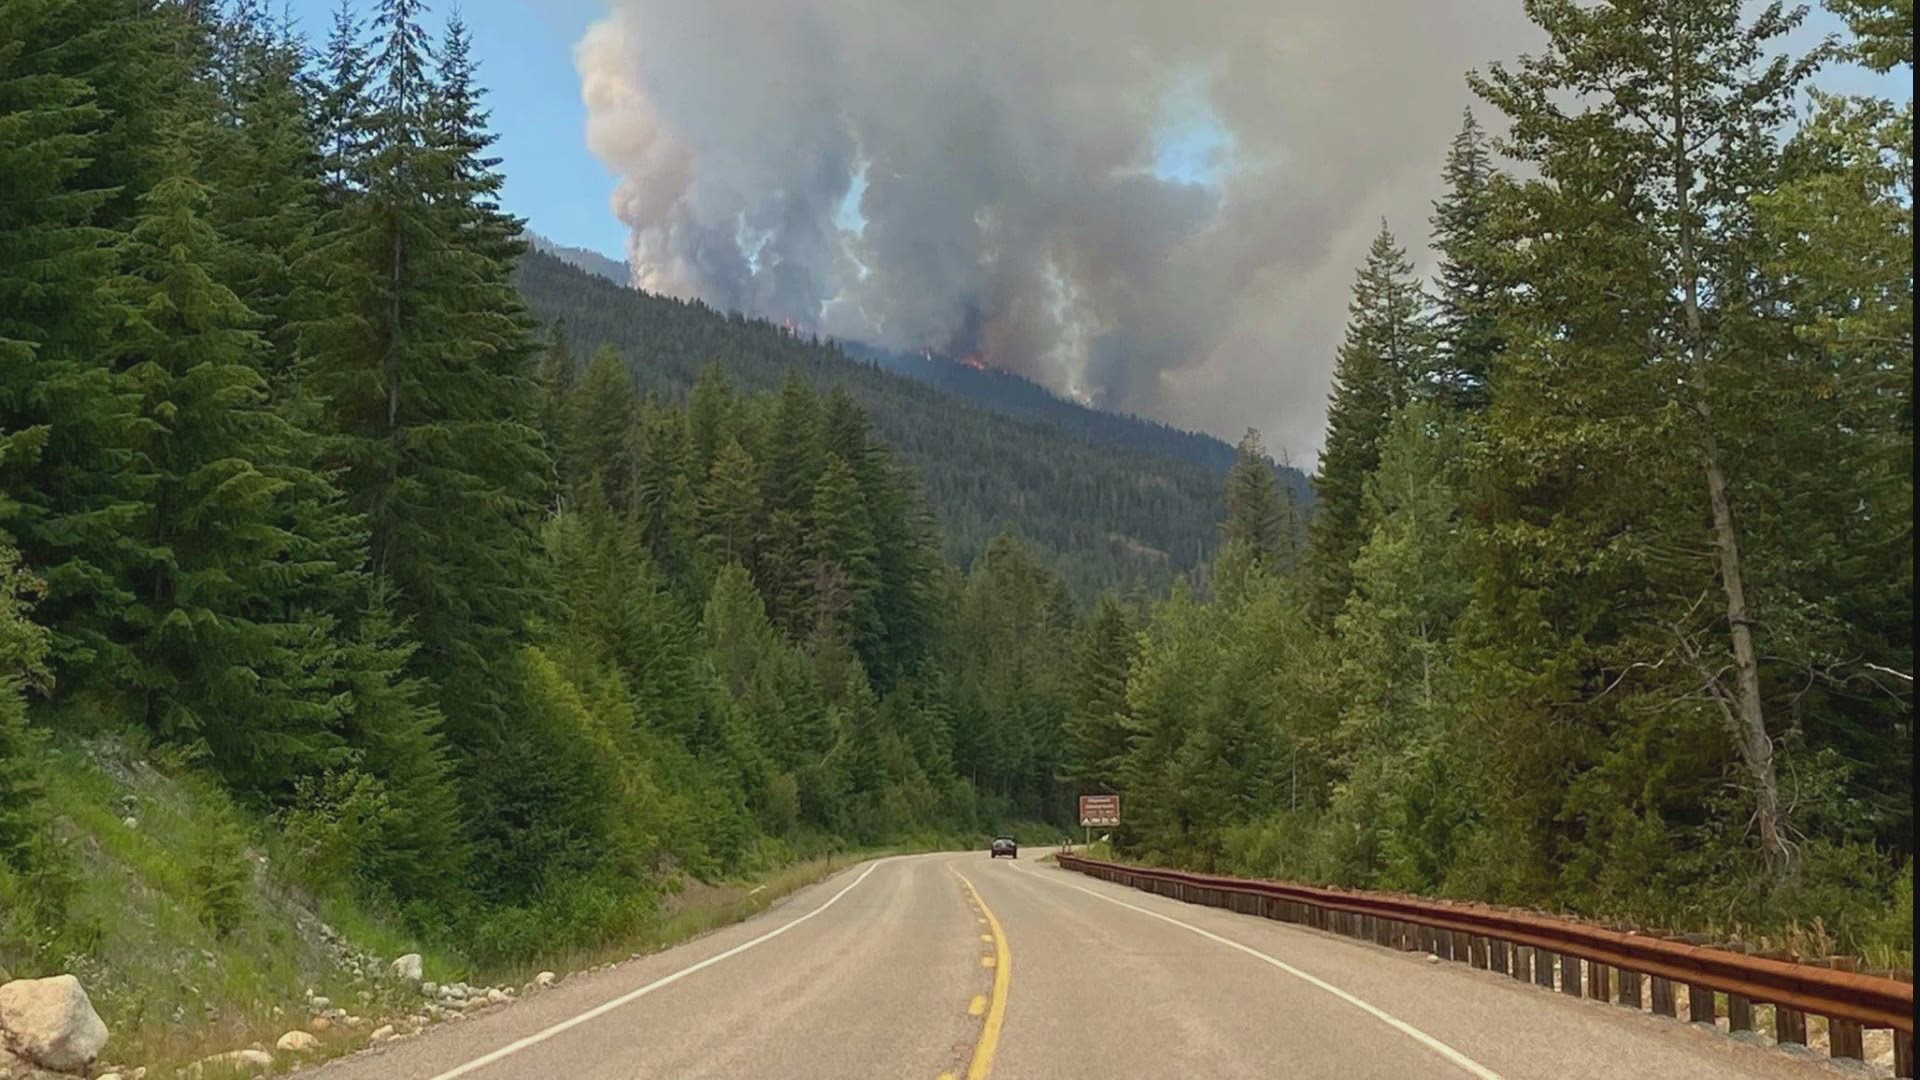 SR 20 will fully close Monday at 10 a.m. for wildfire response activity, the Washington State Department of Transportation said.